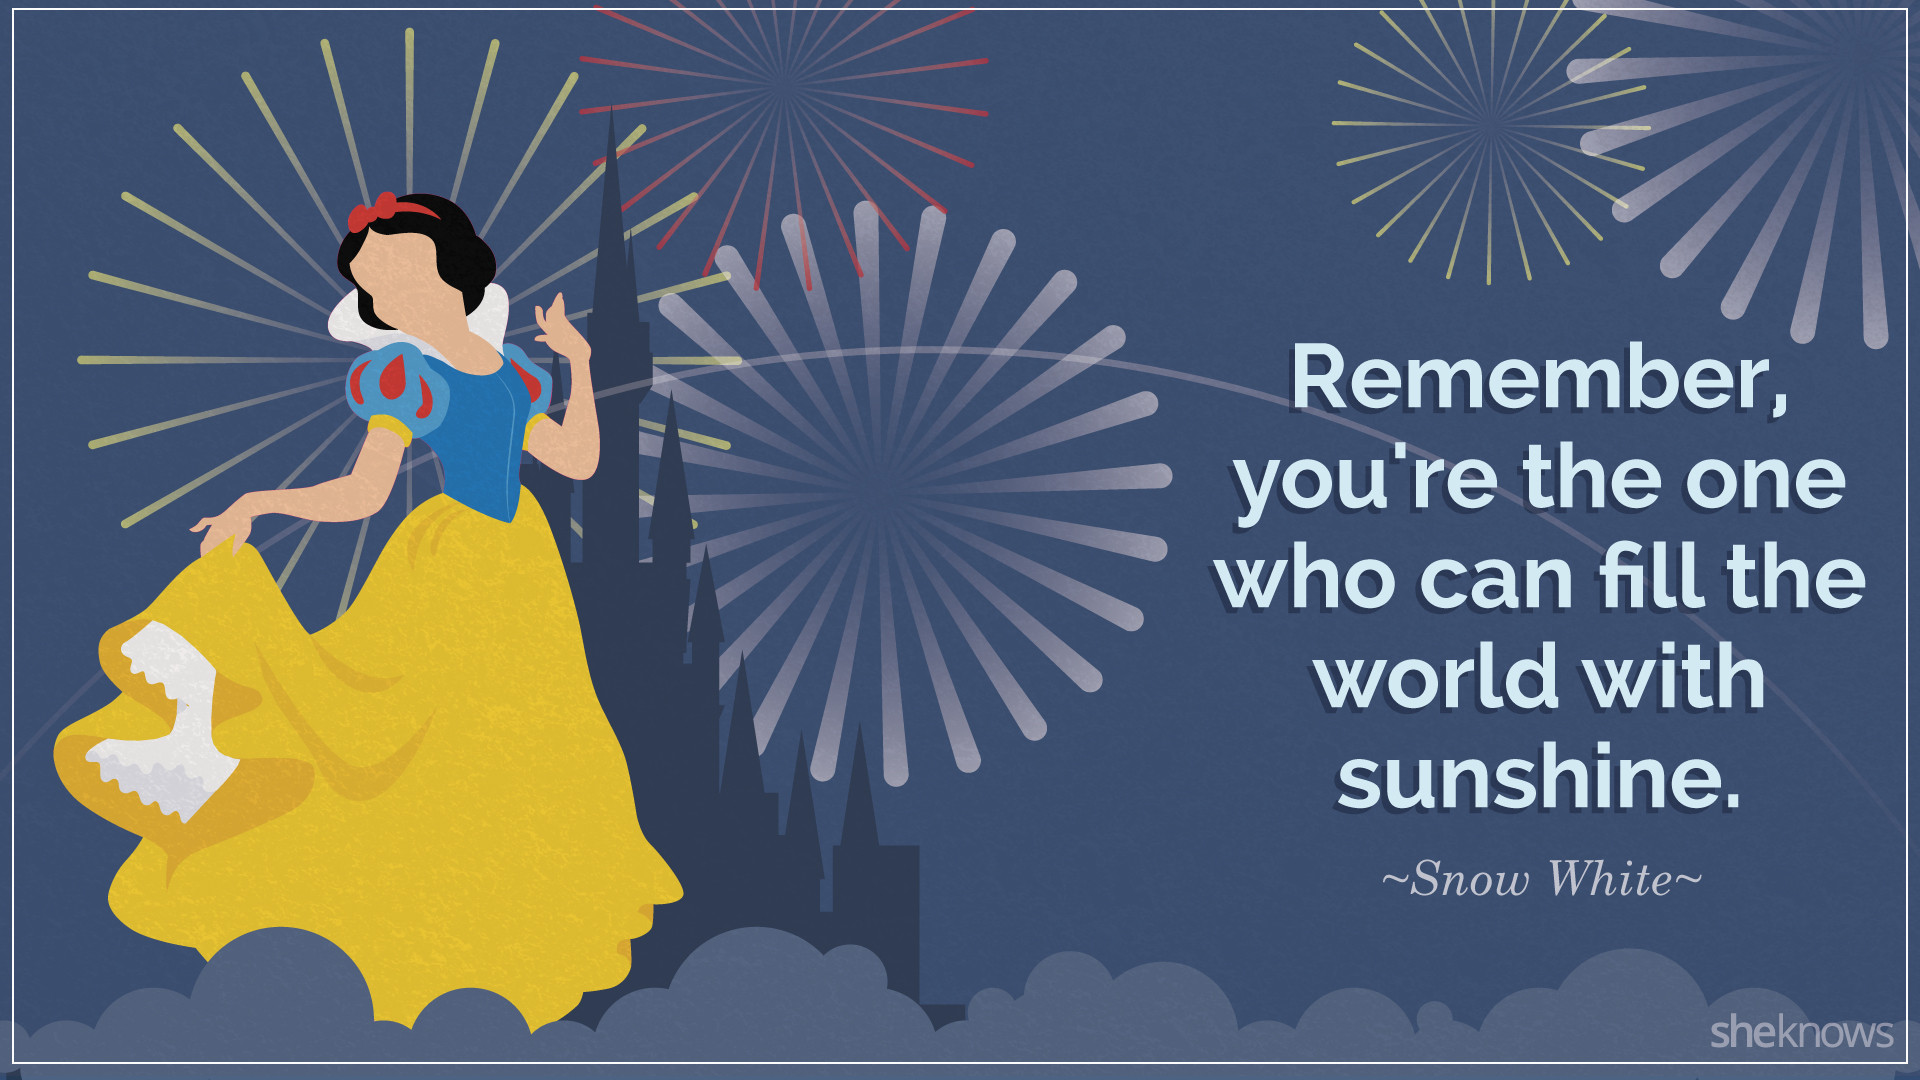 Motivational Disney Quotes
 9 Inspirational Quotes From Your Favorite Disney Princesses